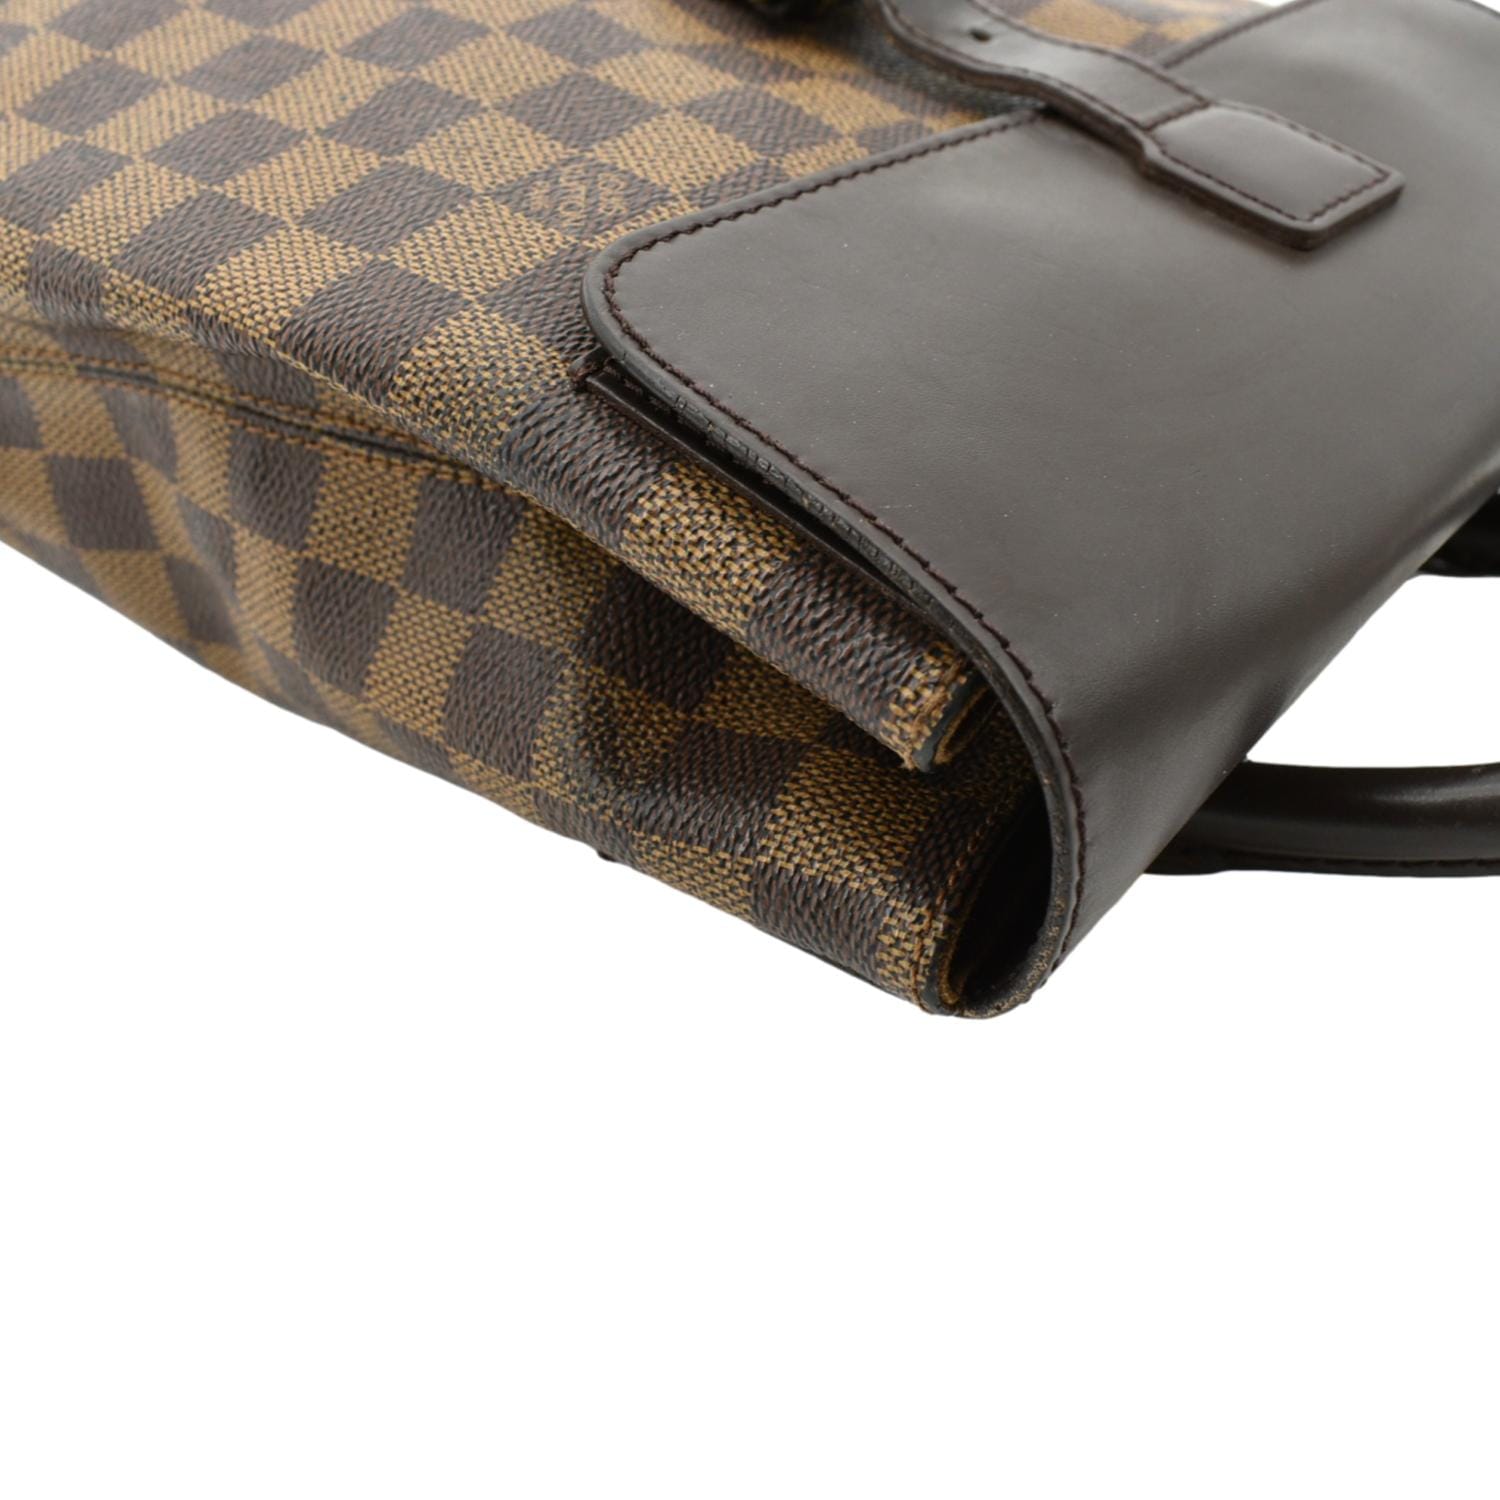 Louis+Vuitton+Soho+Backpack+Brown+Canvas for sale online